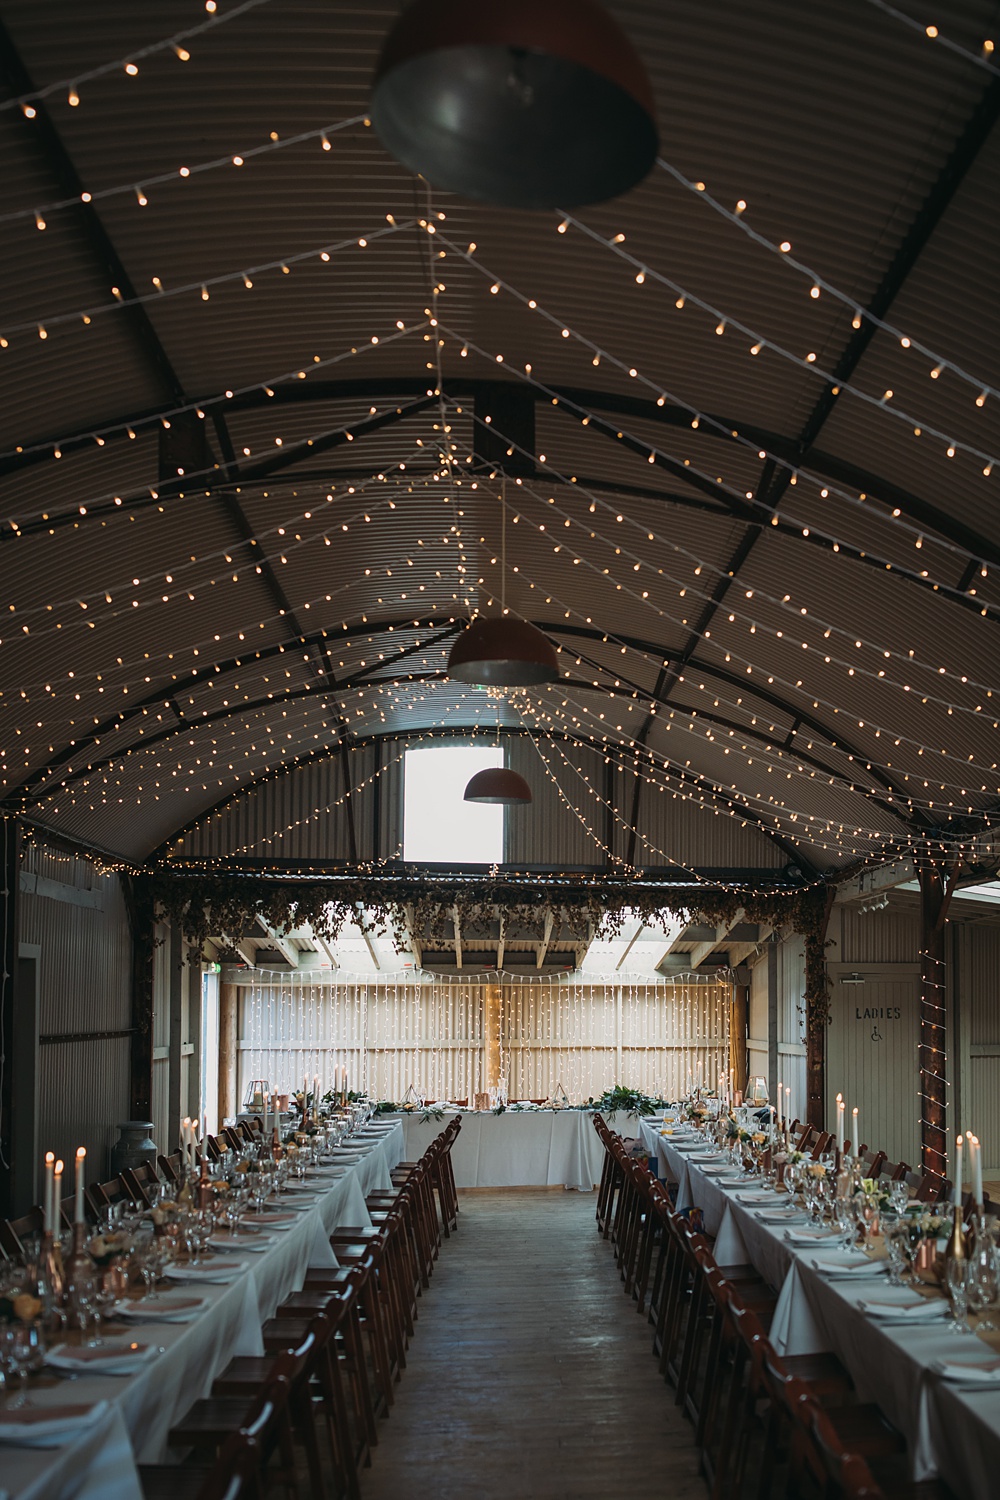 The whole venue was illuminated with lights hanging as a canopy above